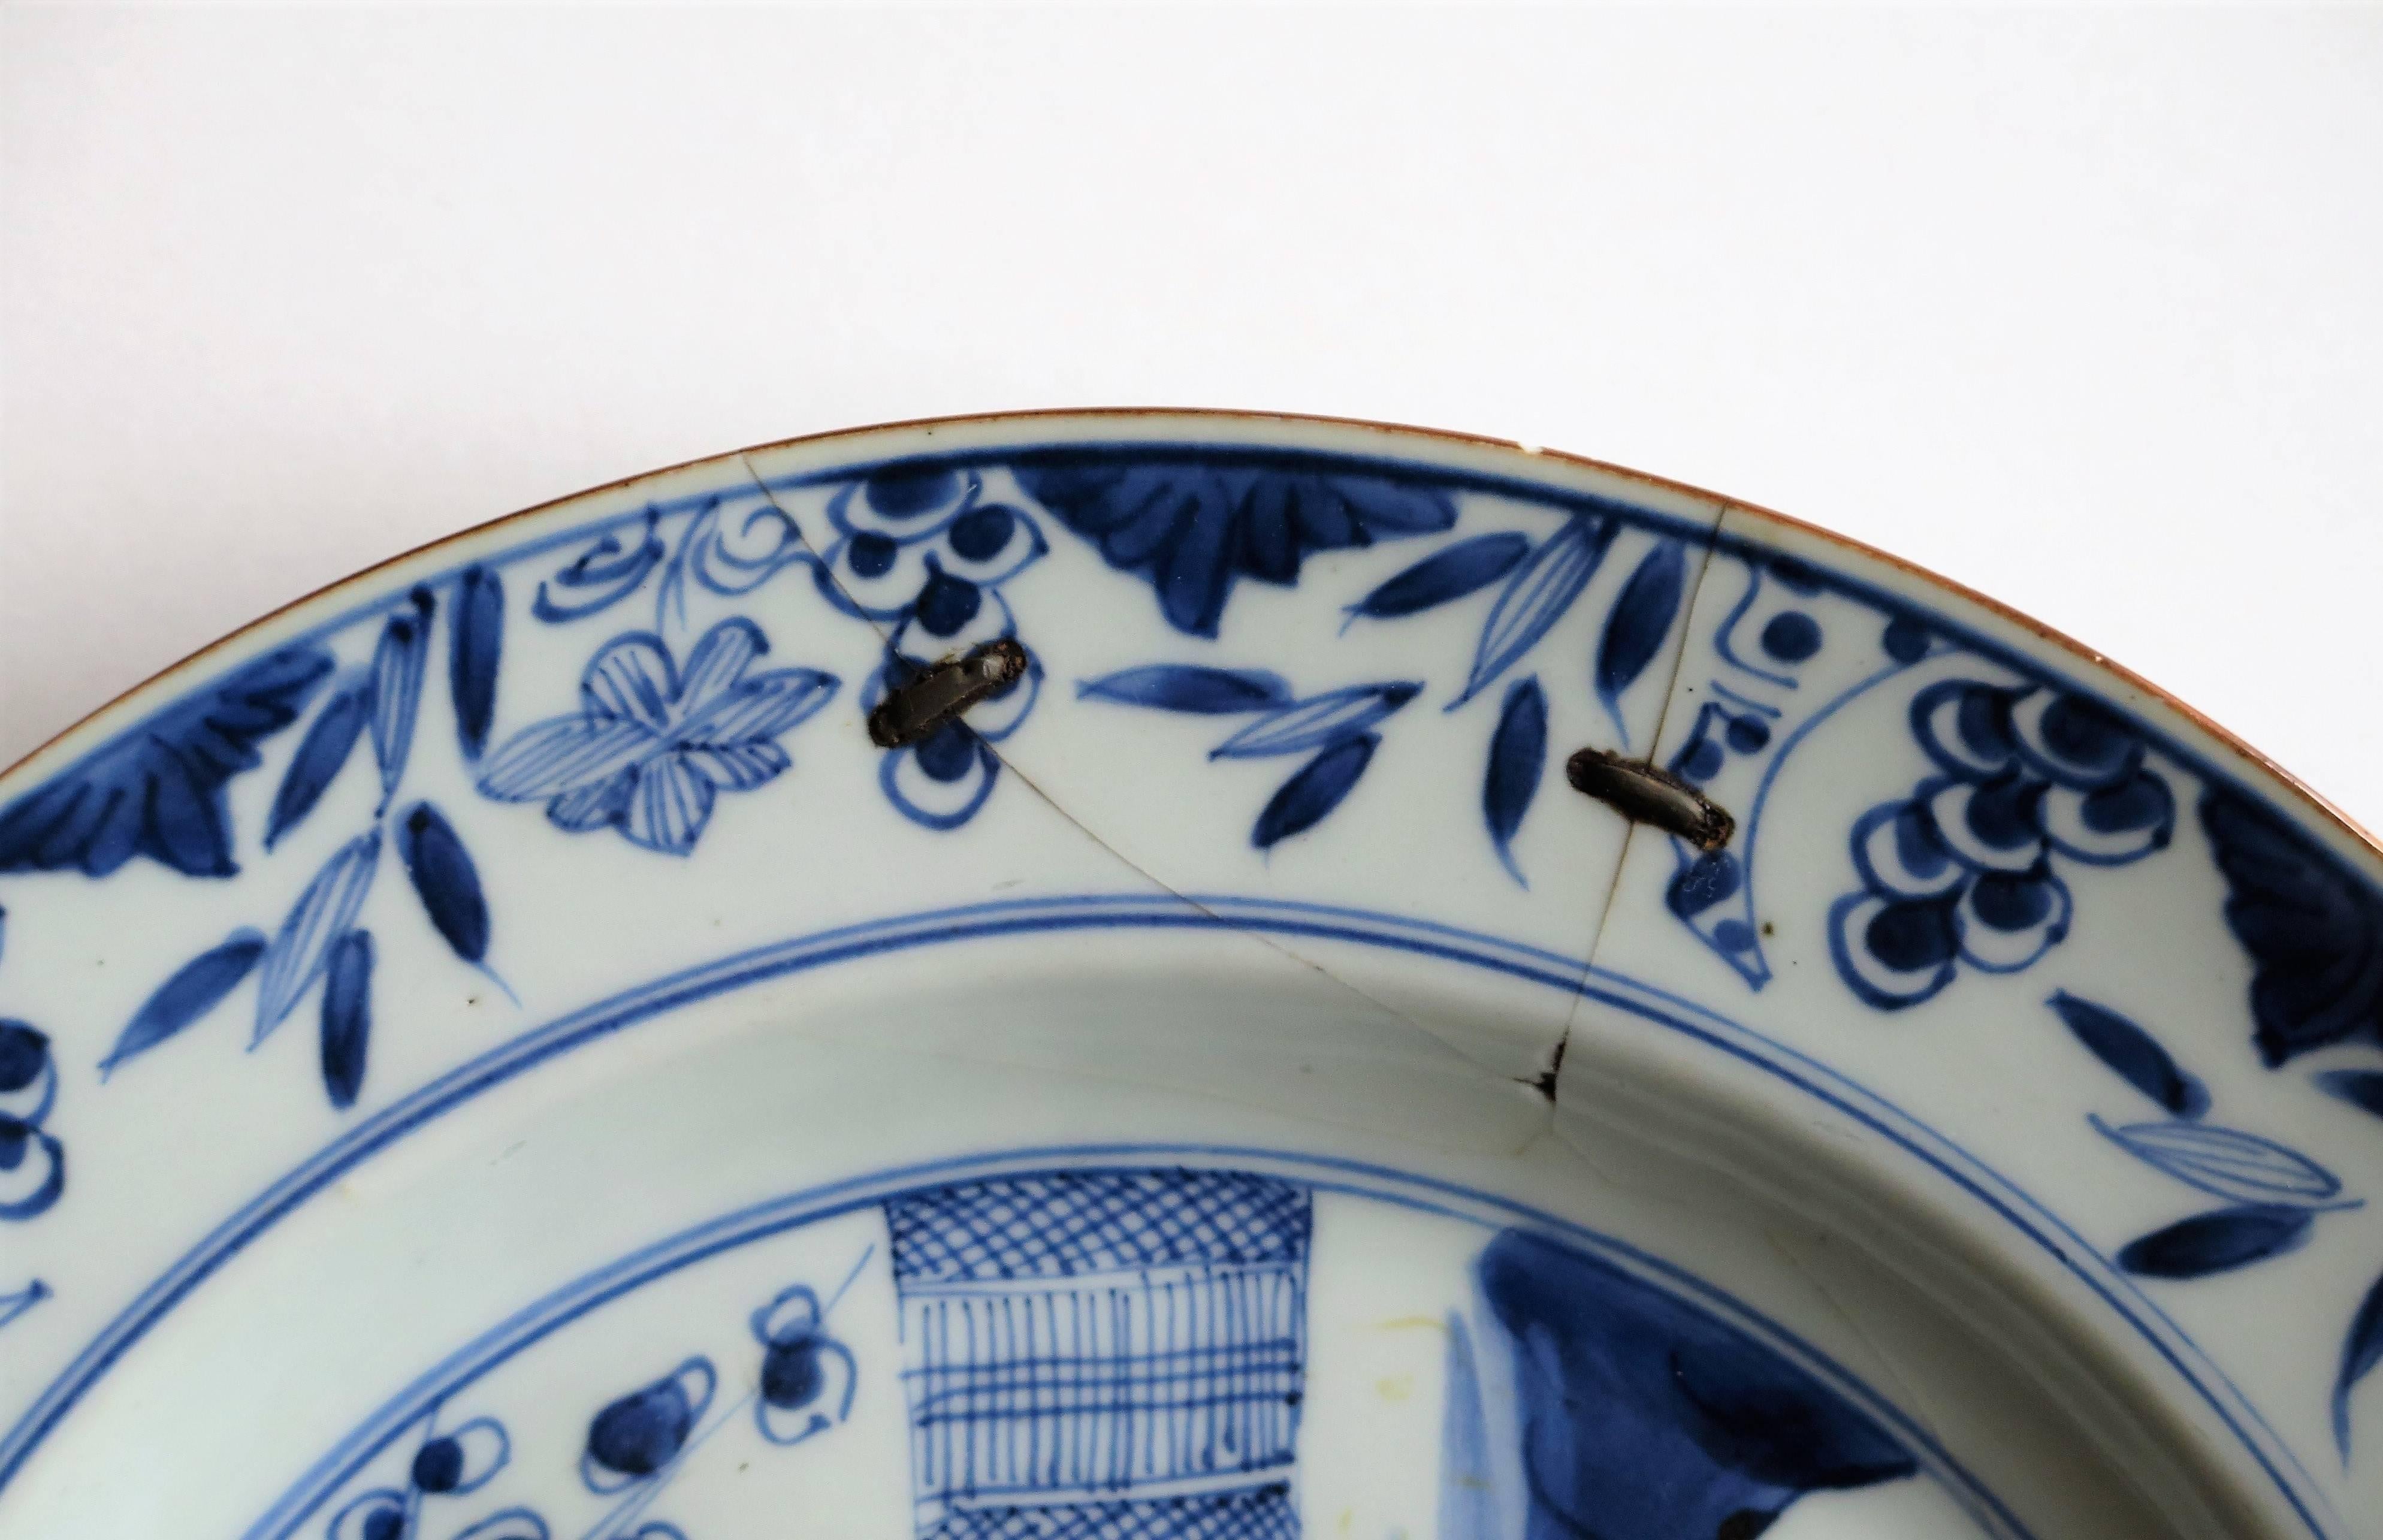 18th Century Large 18thC. Chinese Plate Porcelain Blue and White Rivet Repair, Qing Ca. 1720